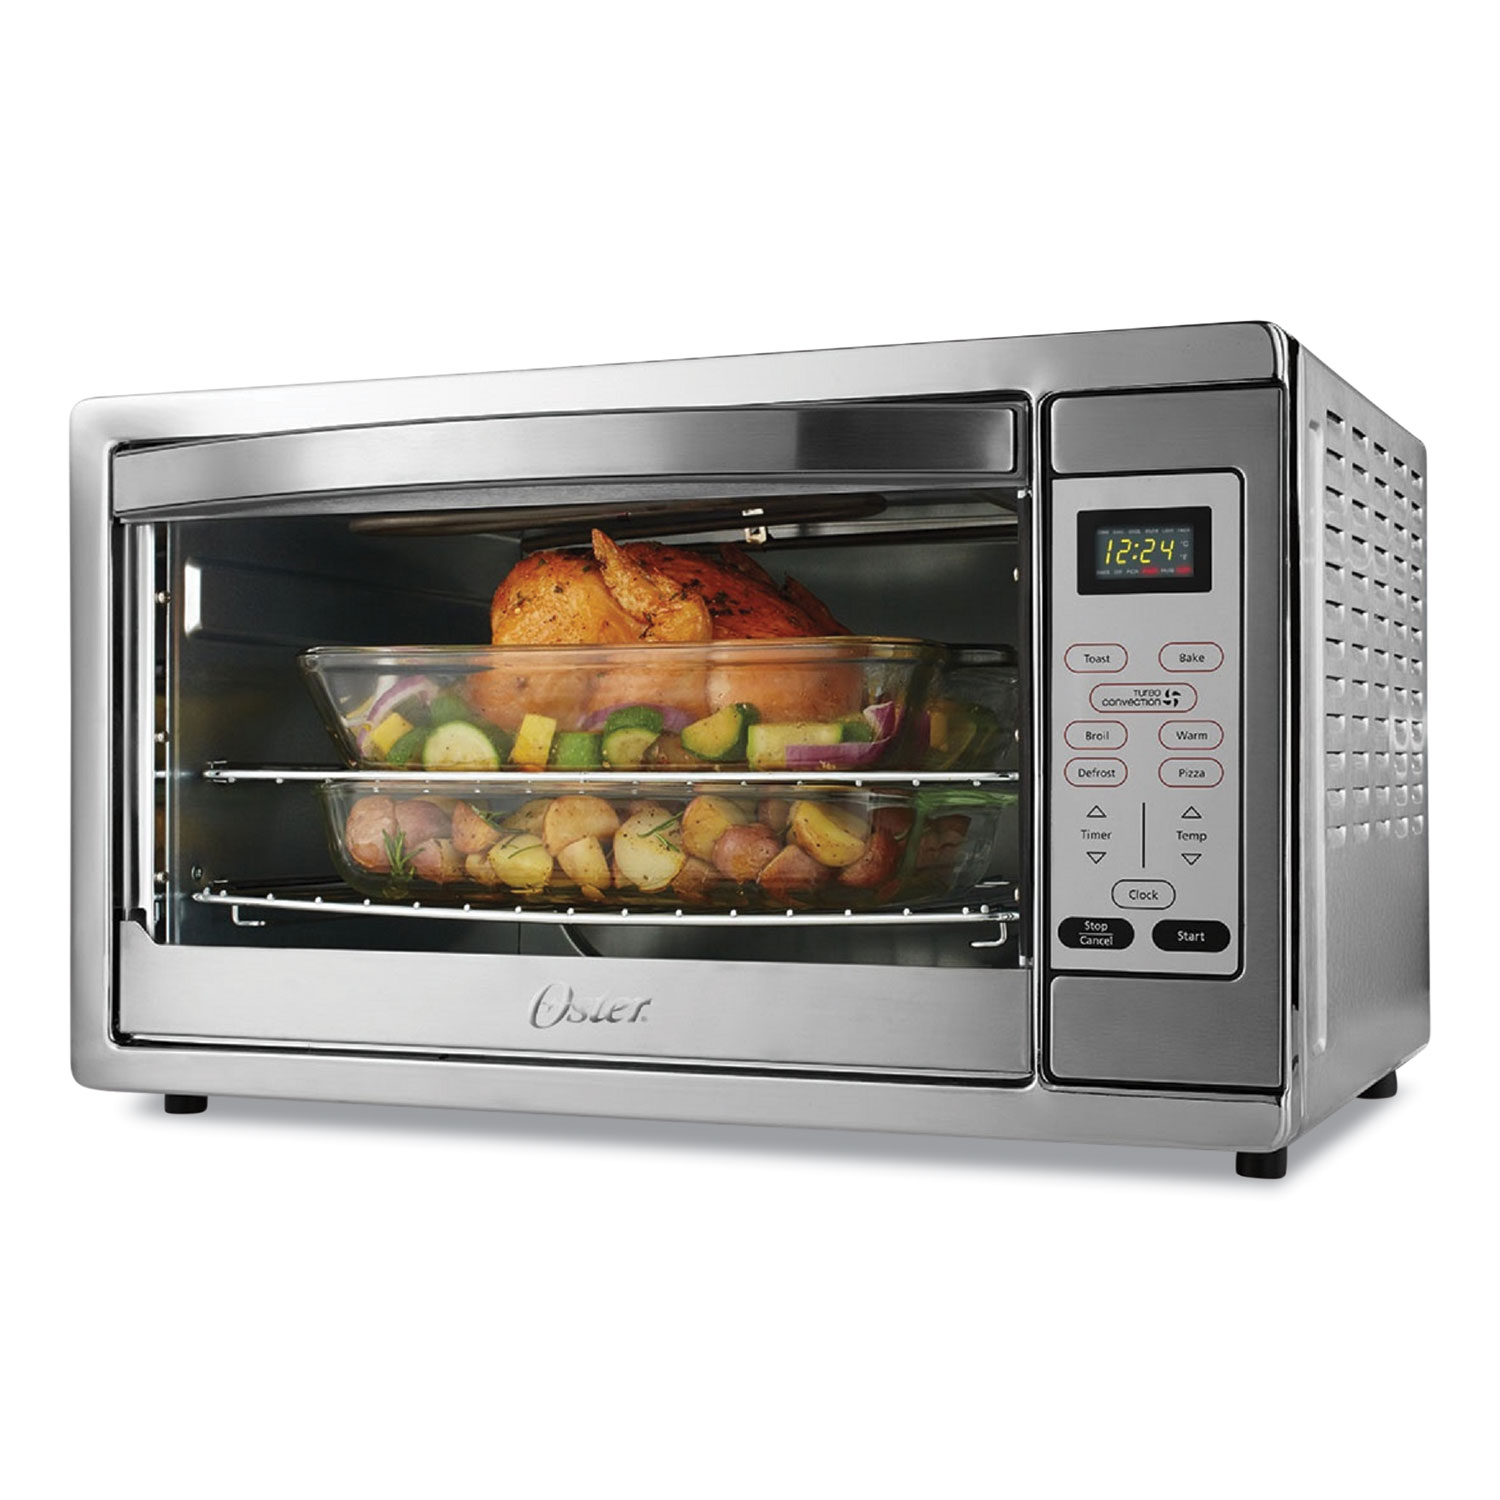 Oster Toaster Oven Stopped Working: Troubleshoot and Revive Your Kitchen Essential